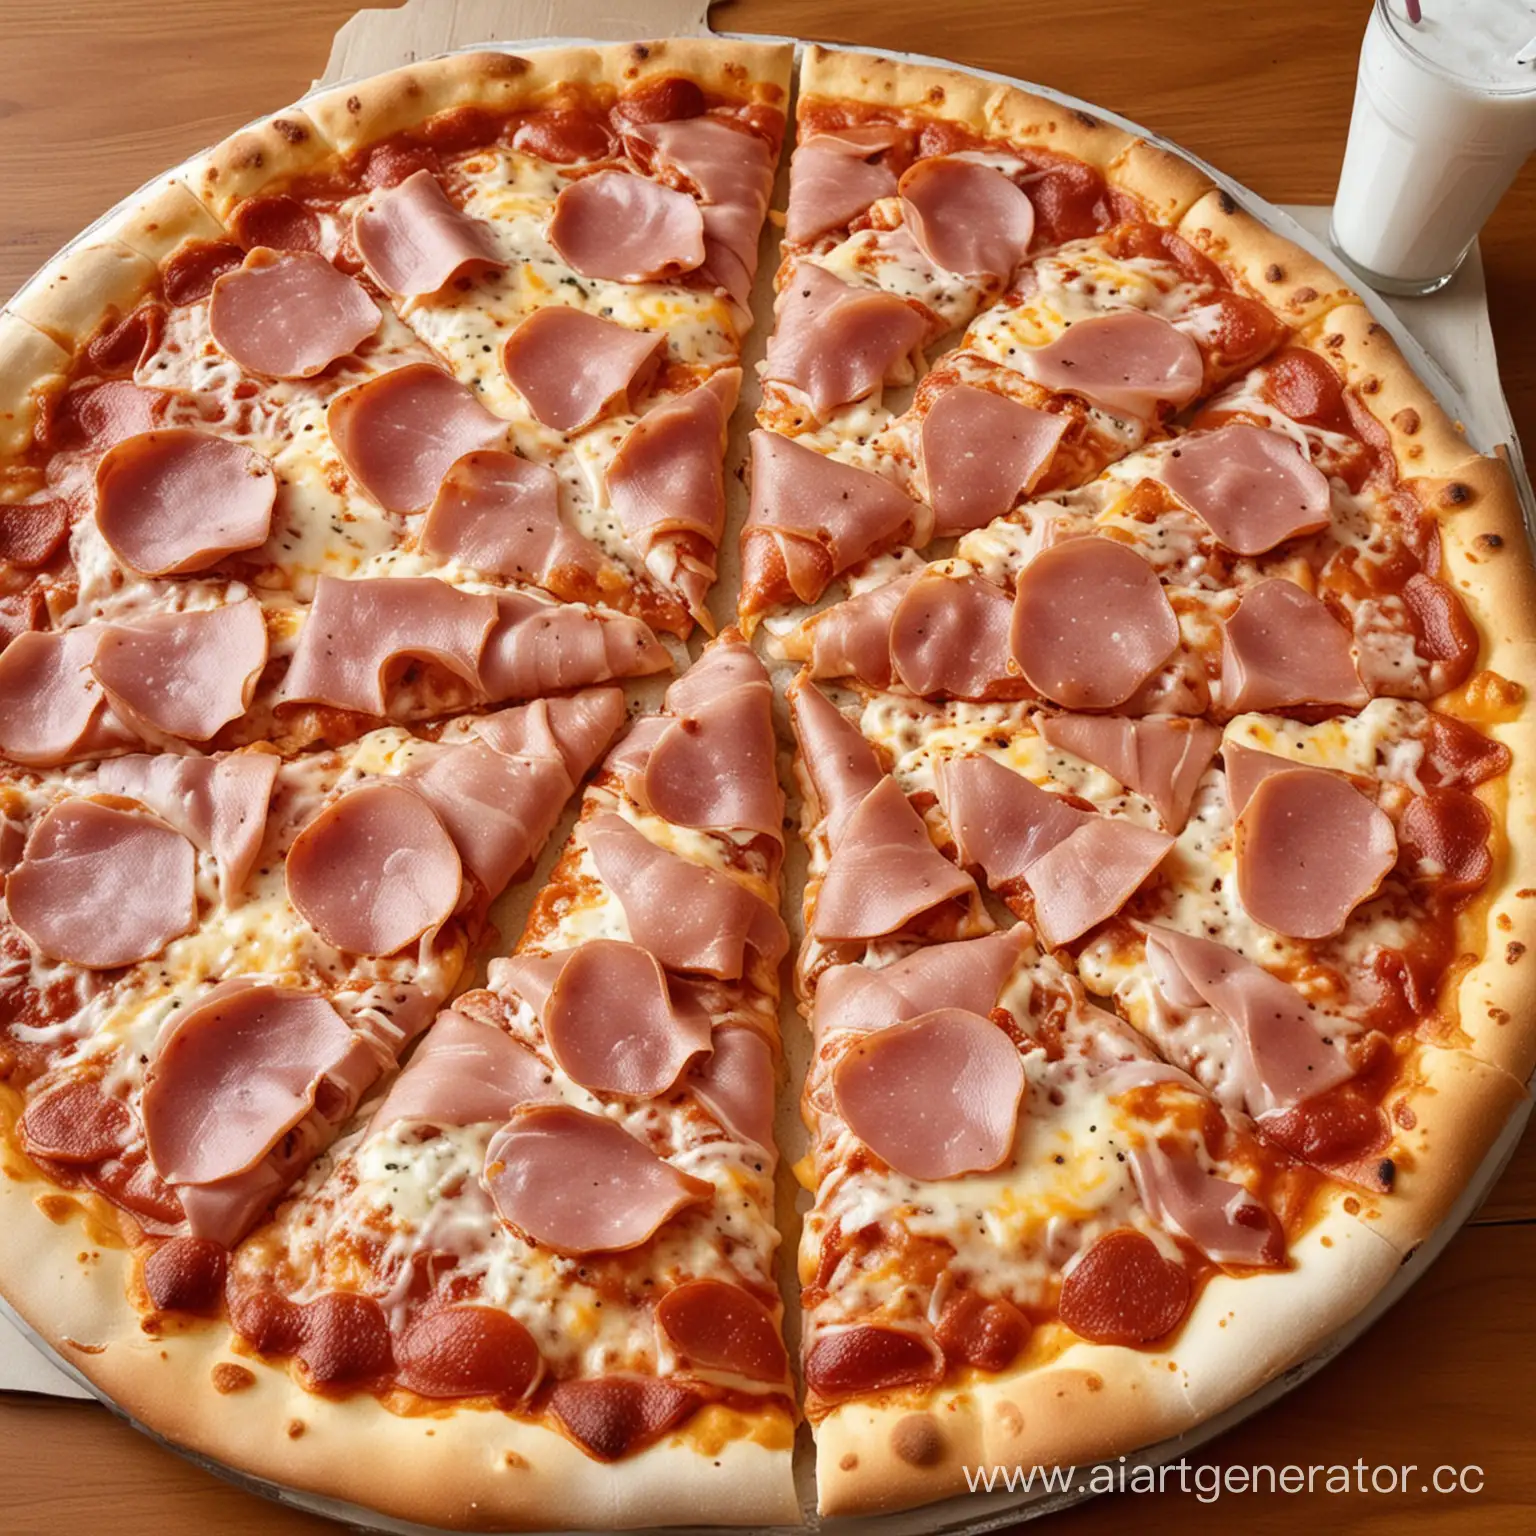 Delicious-Pizza-with-Ham-and-Cheese-accompanied-by-Refreshing-Sodas